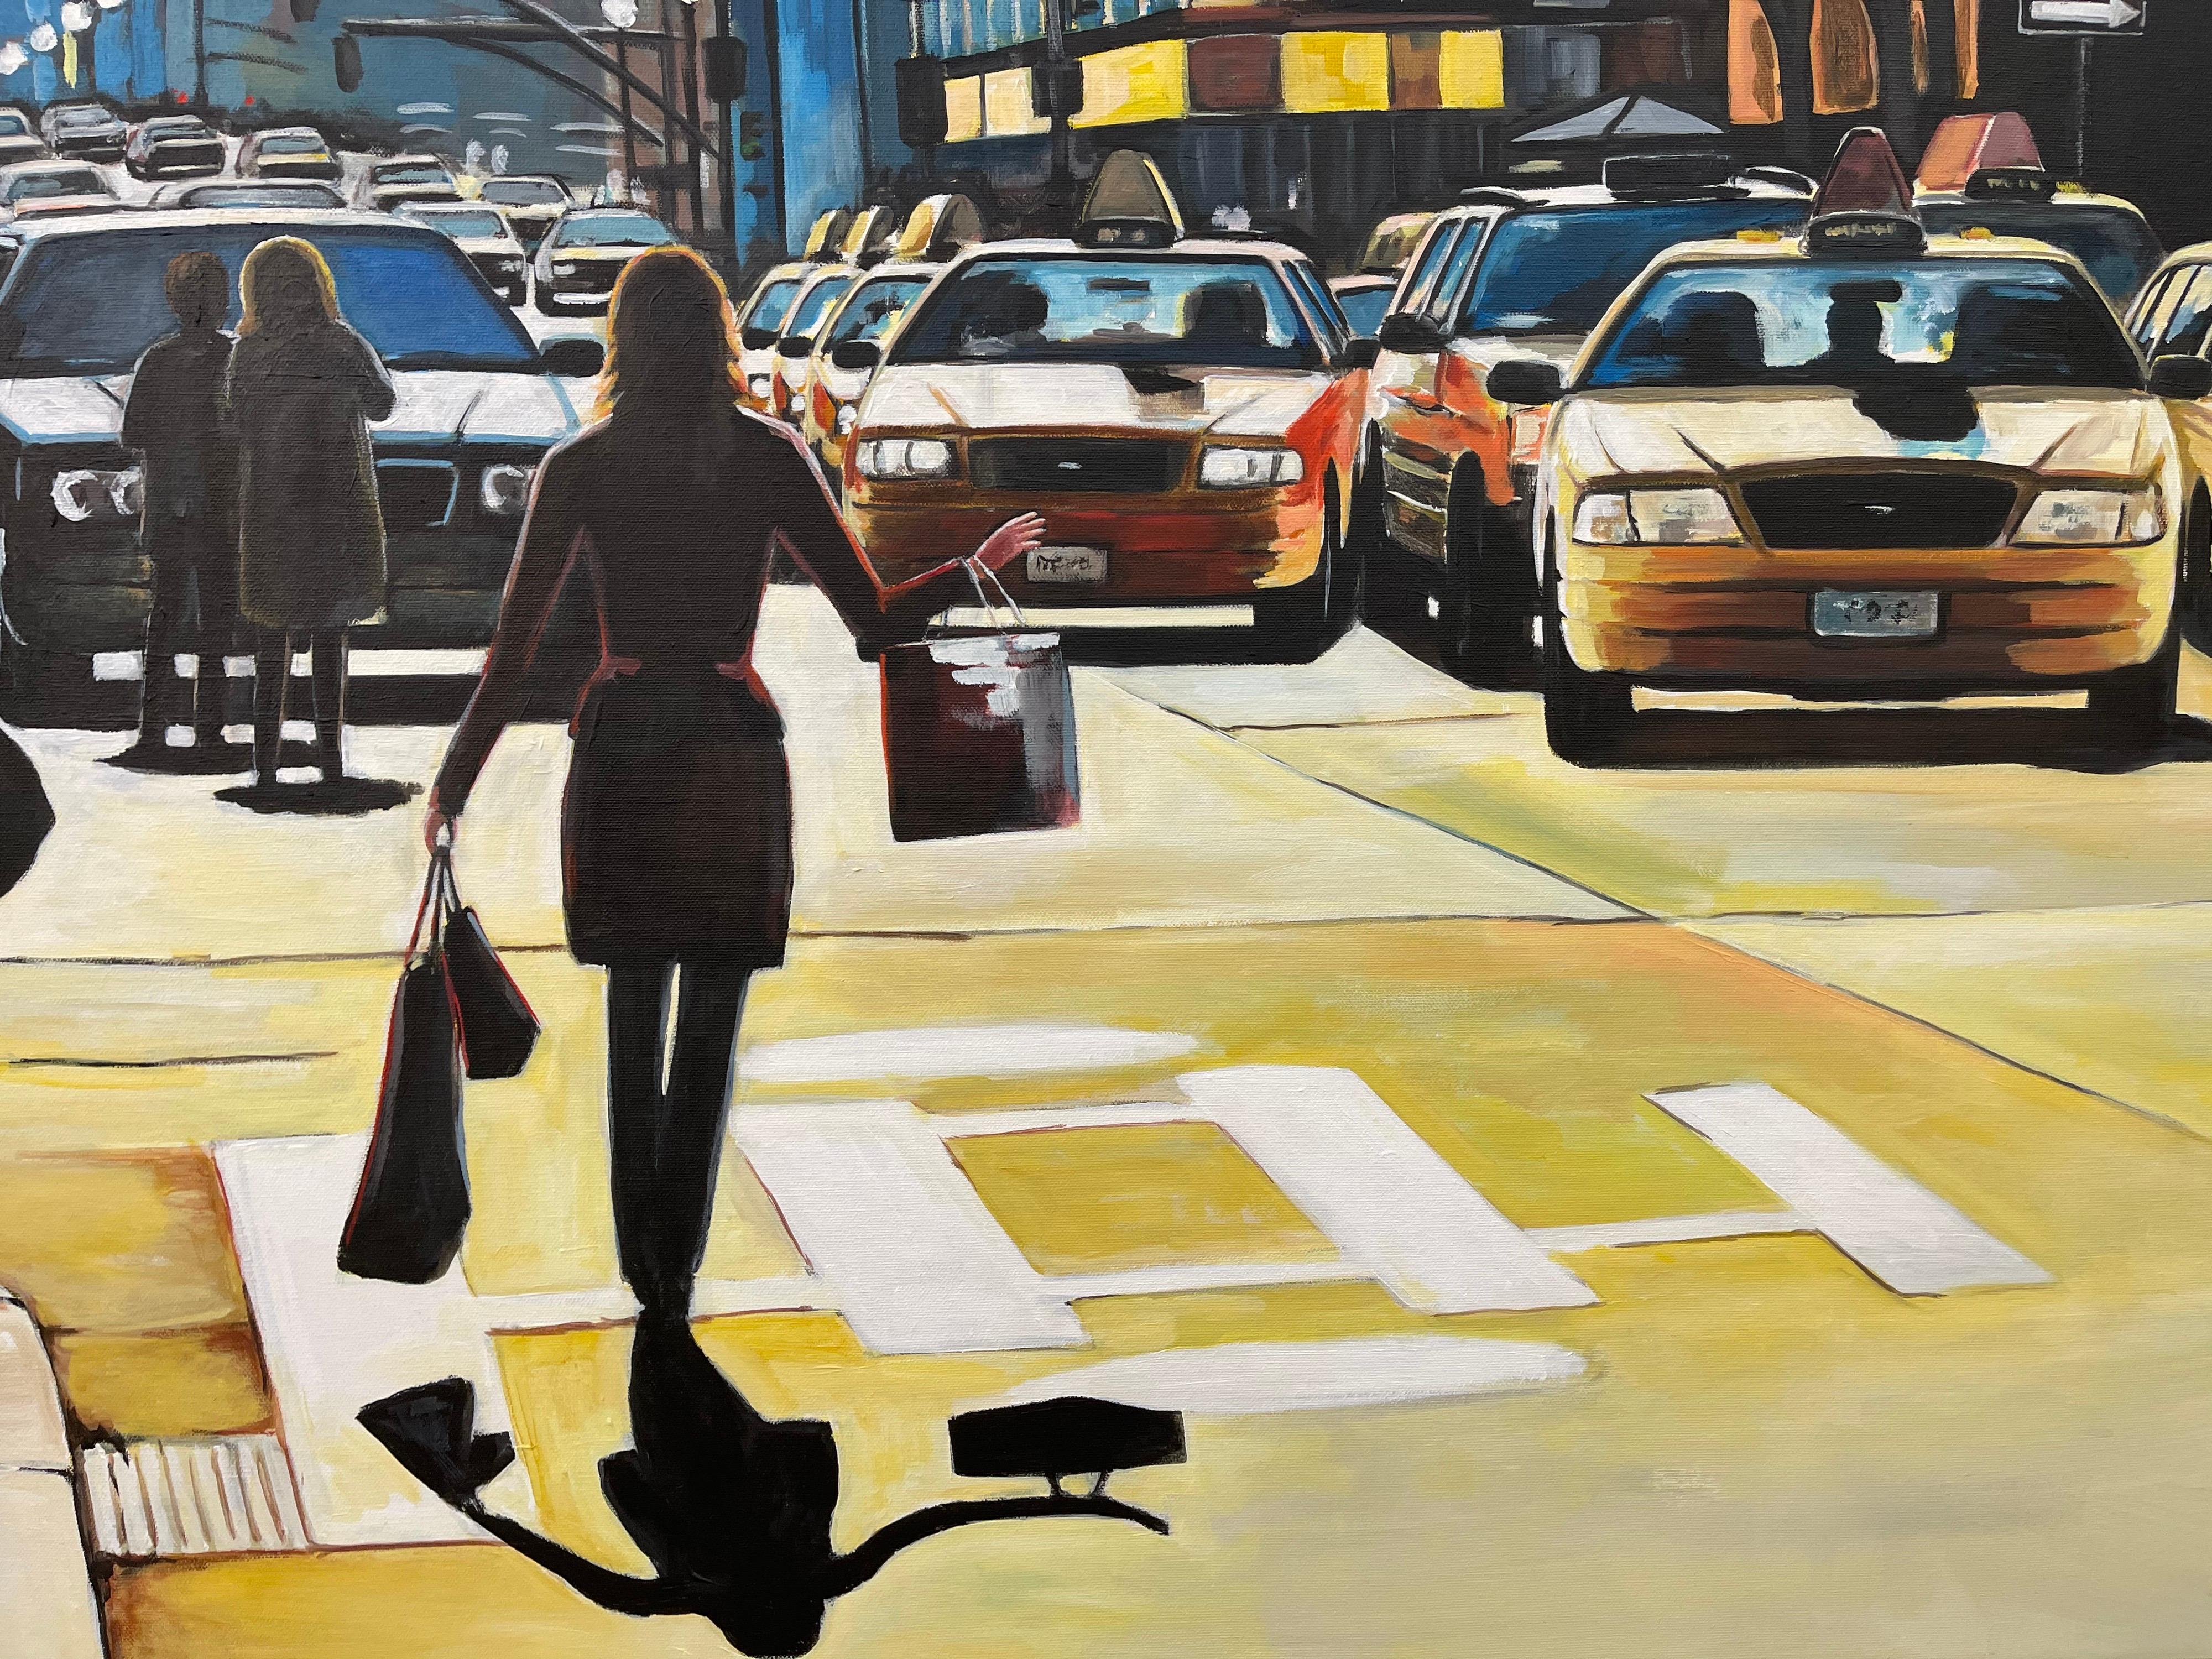 Female Figure Shopping in New York City Sunshine by Contemporary British Artist - Realist Painting by Angela Wakefield